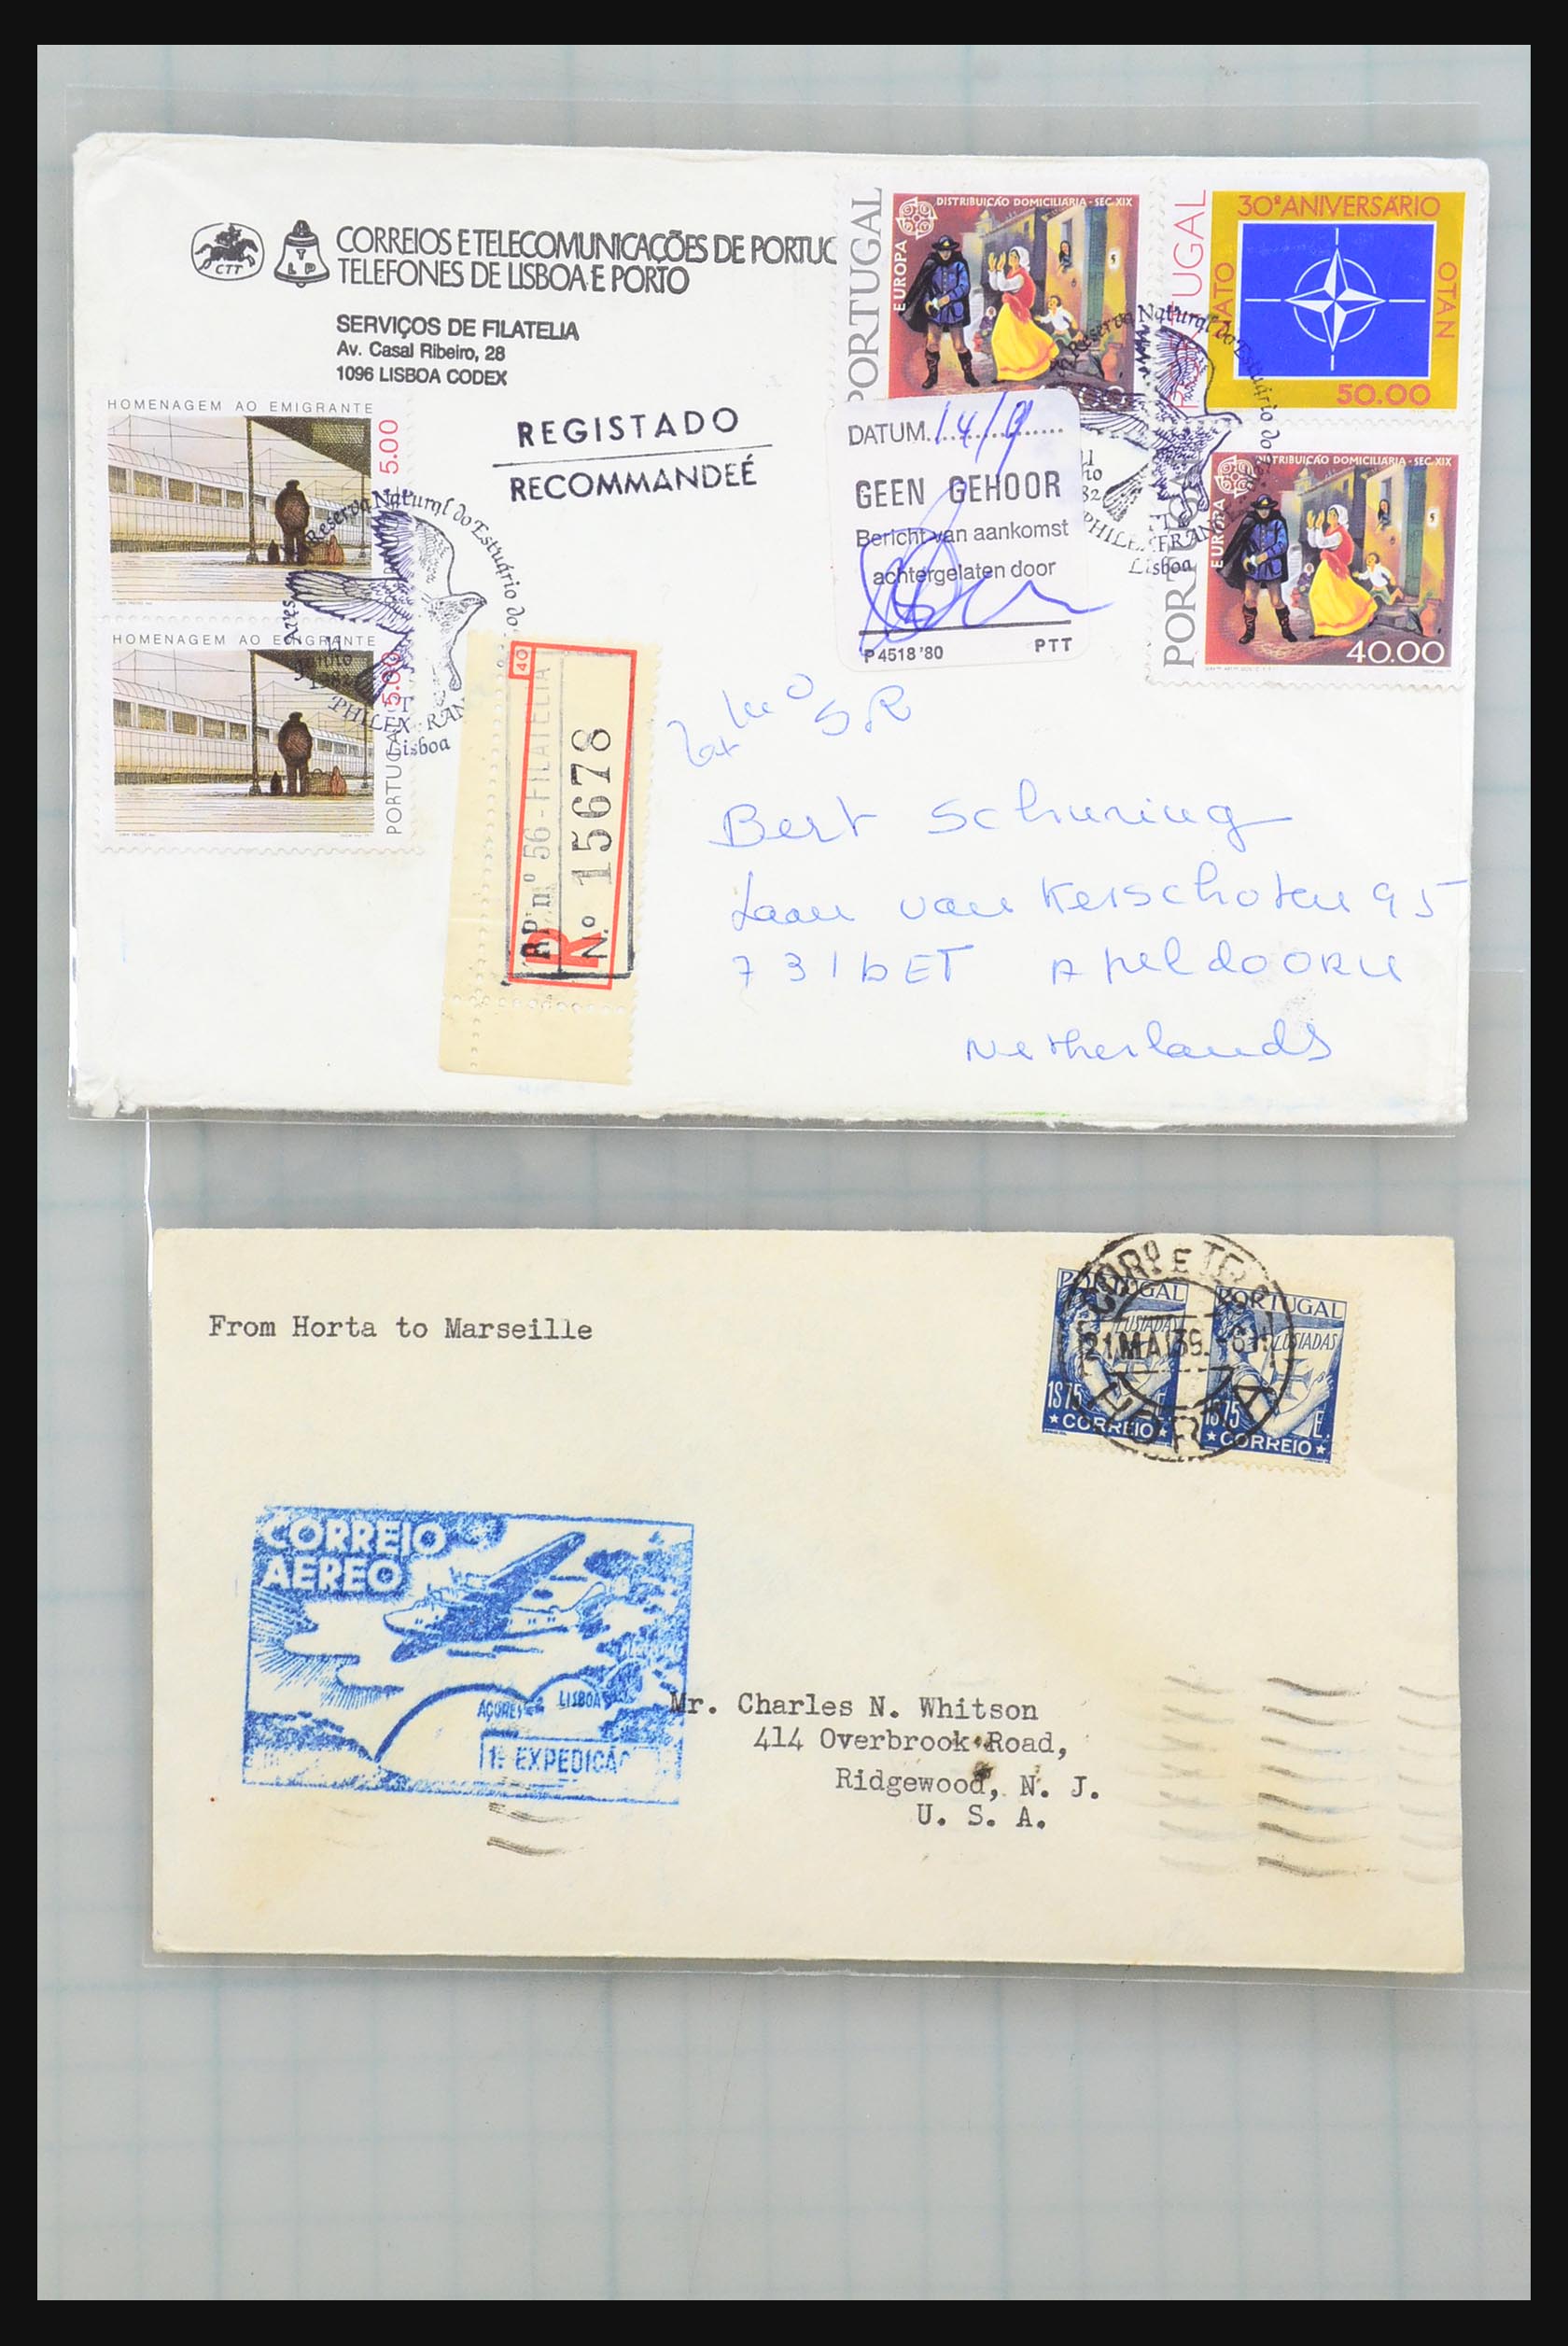 31358 221 - 31358 Portugal/Luxemburg/Greece covers 1880-1960.